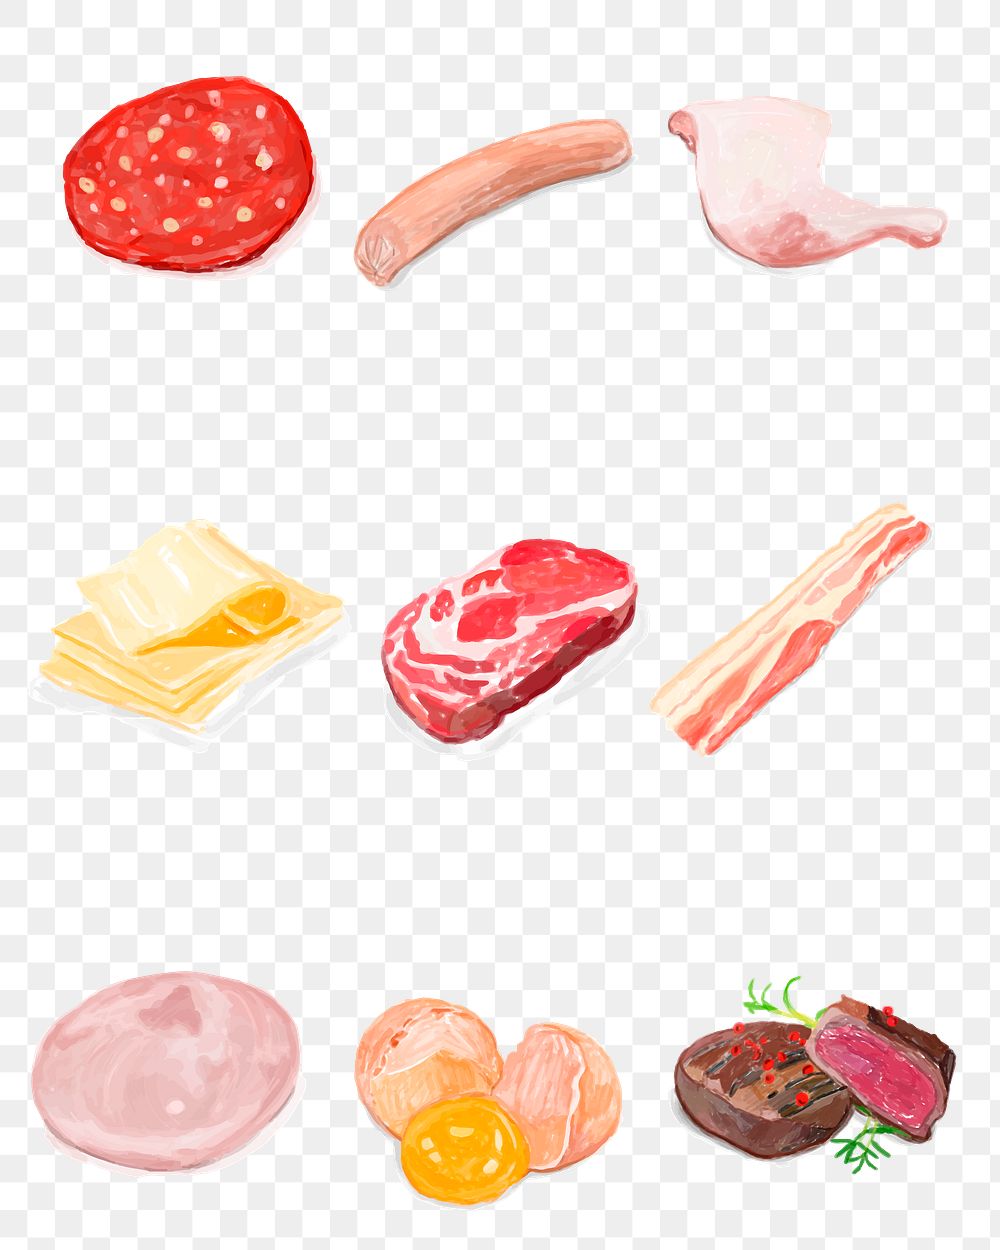 Food ingredients png sticker watercolor illustration collection